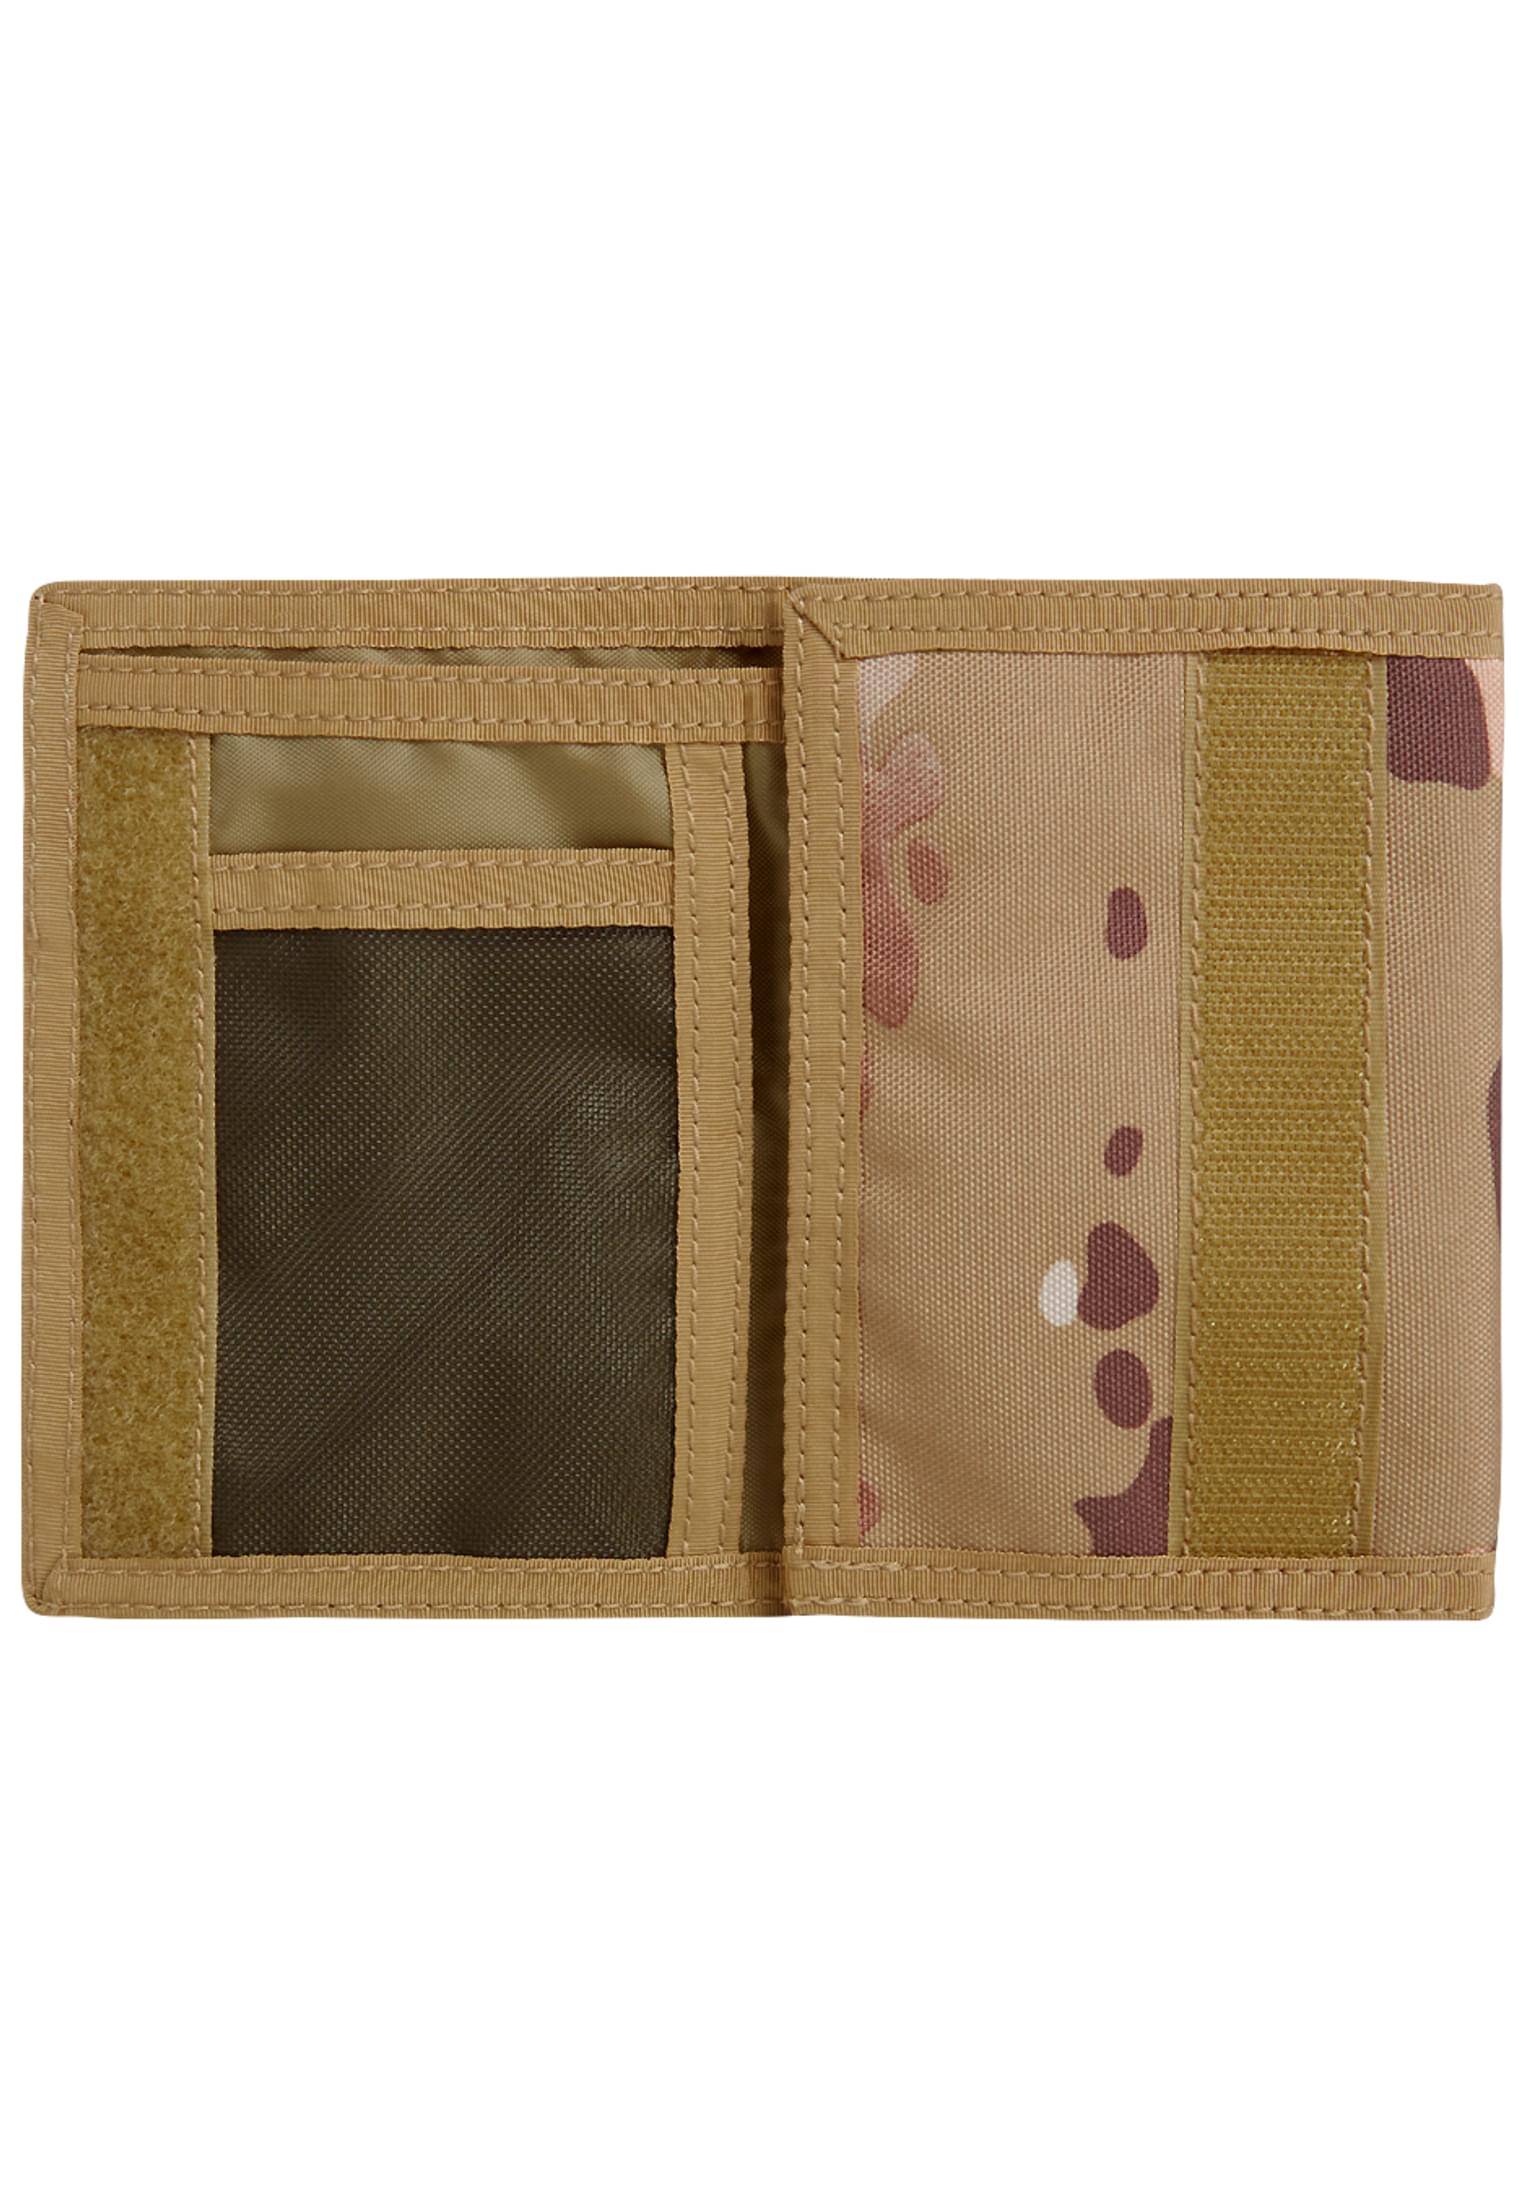 Taschen Wallet Three in Farbe tactical camo